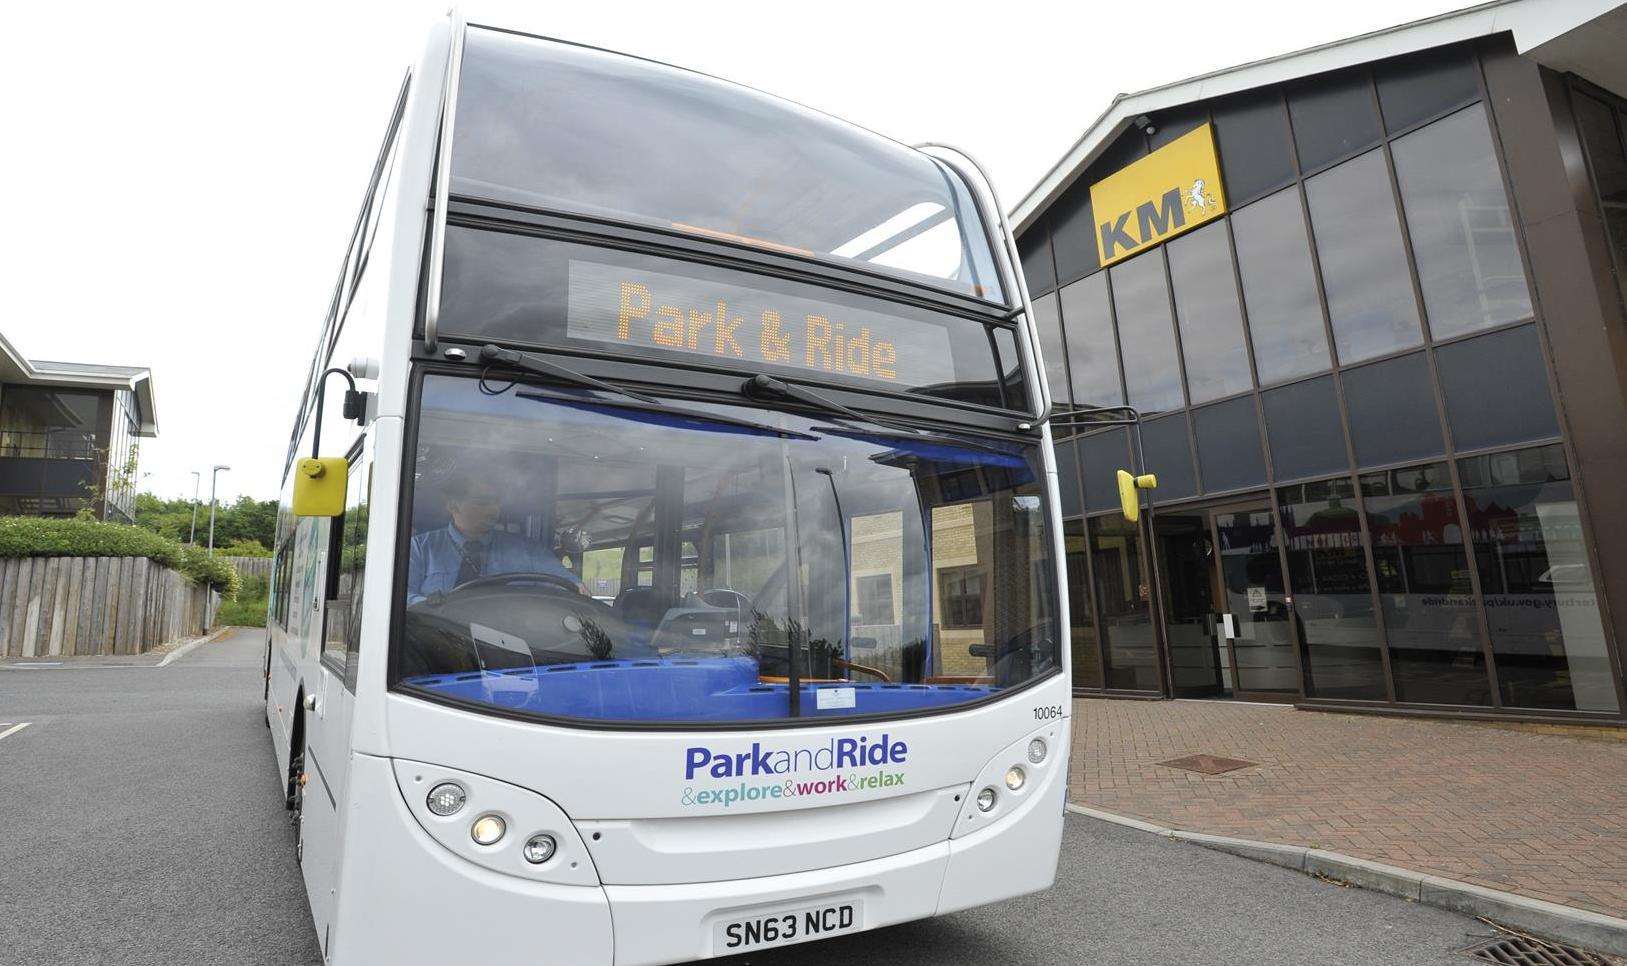 The council claims it is investigating the feasibility of a park and ride service in Whitstable